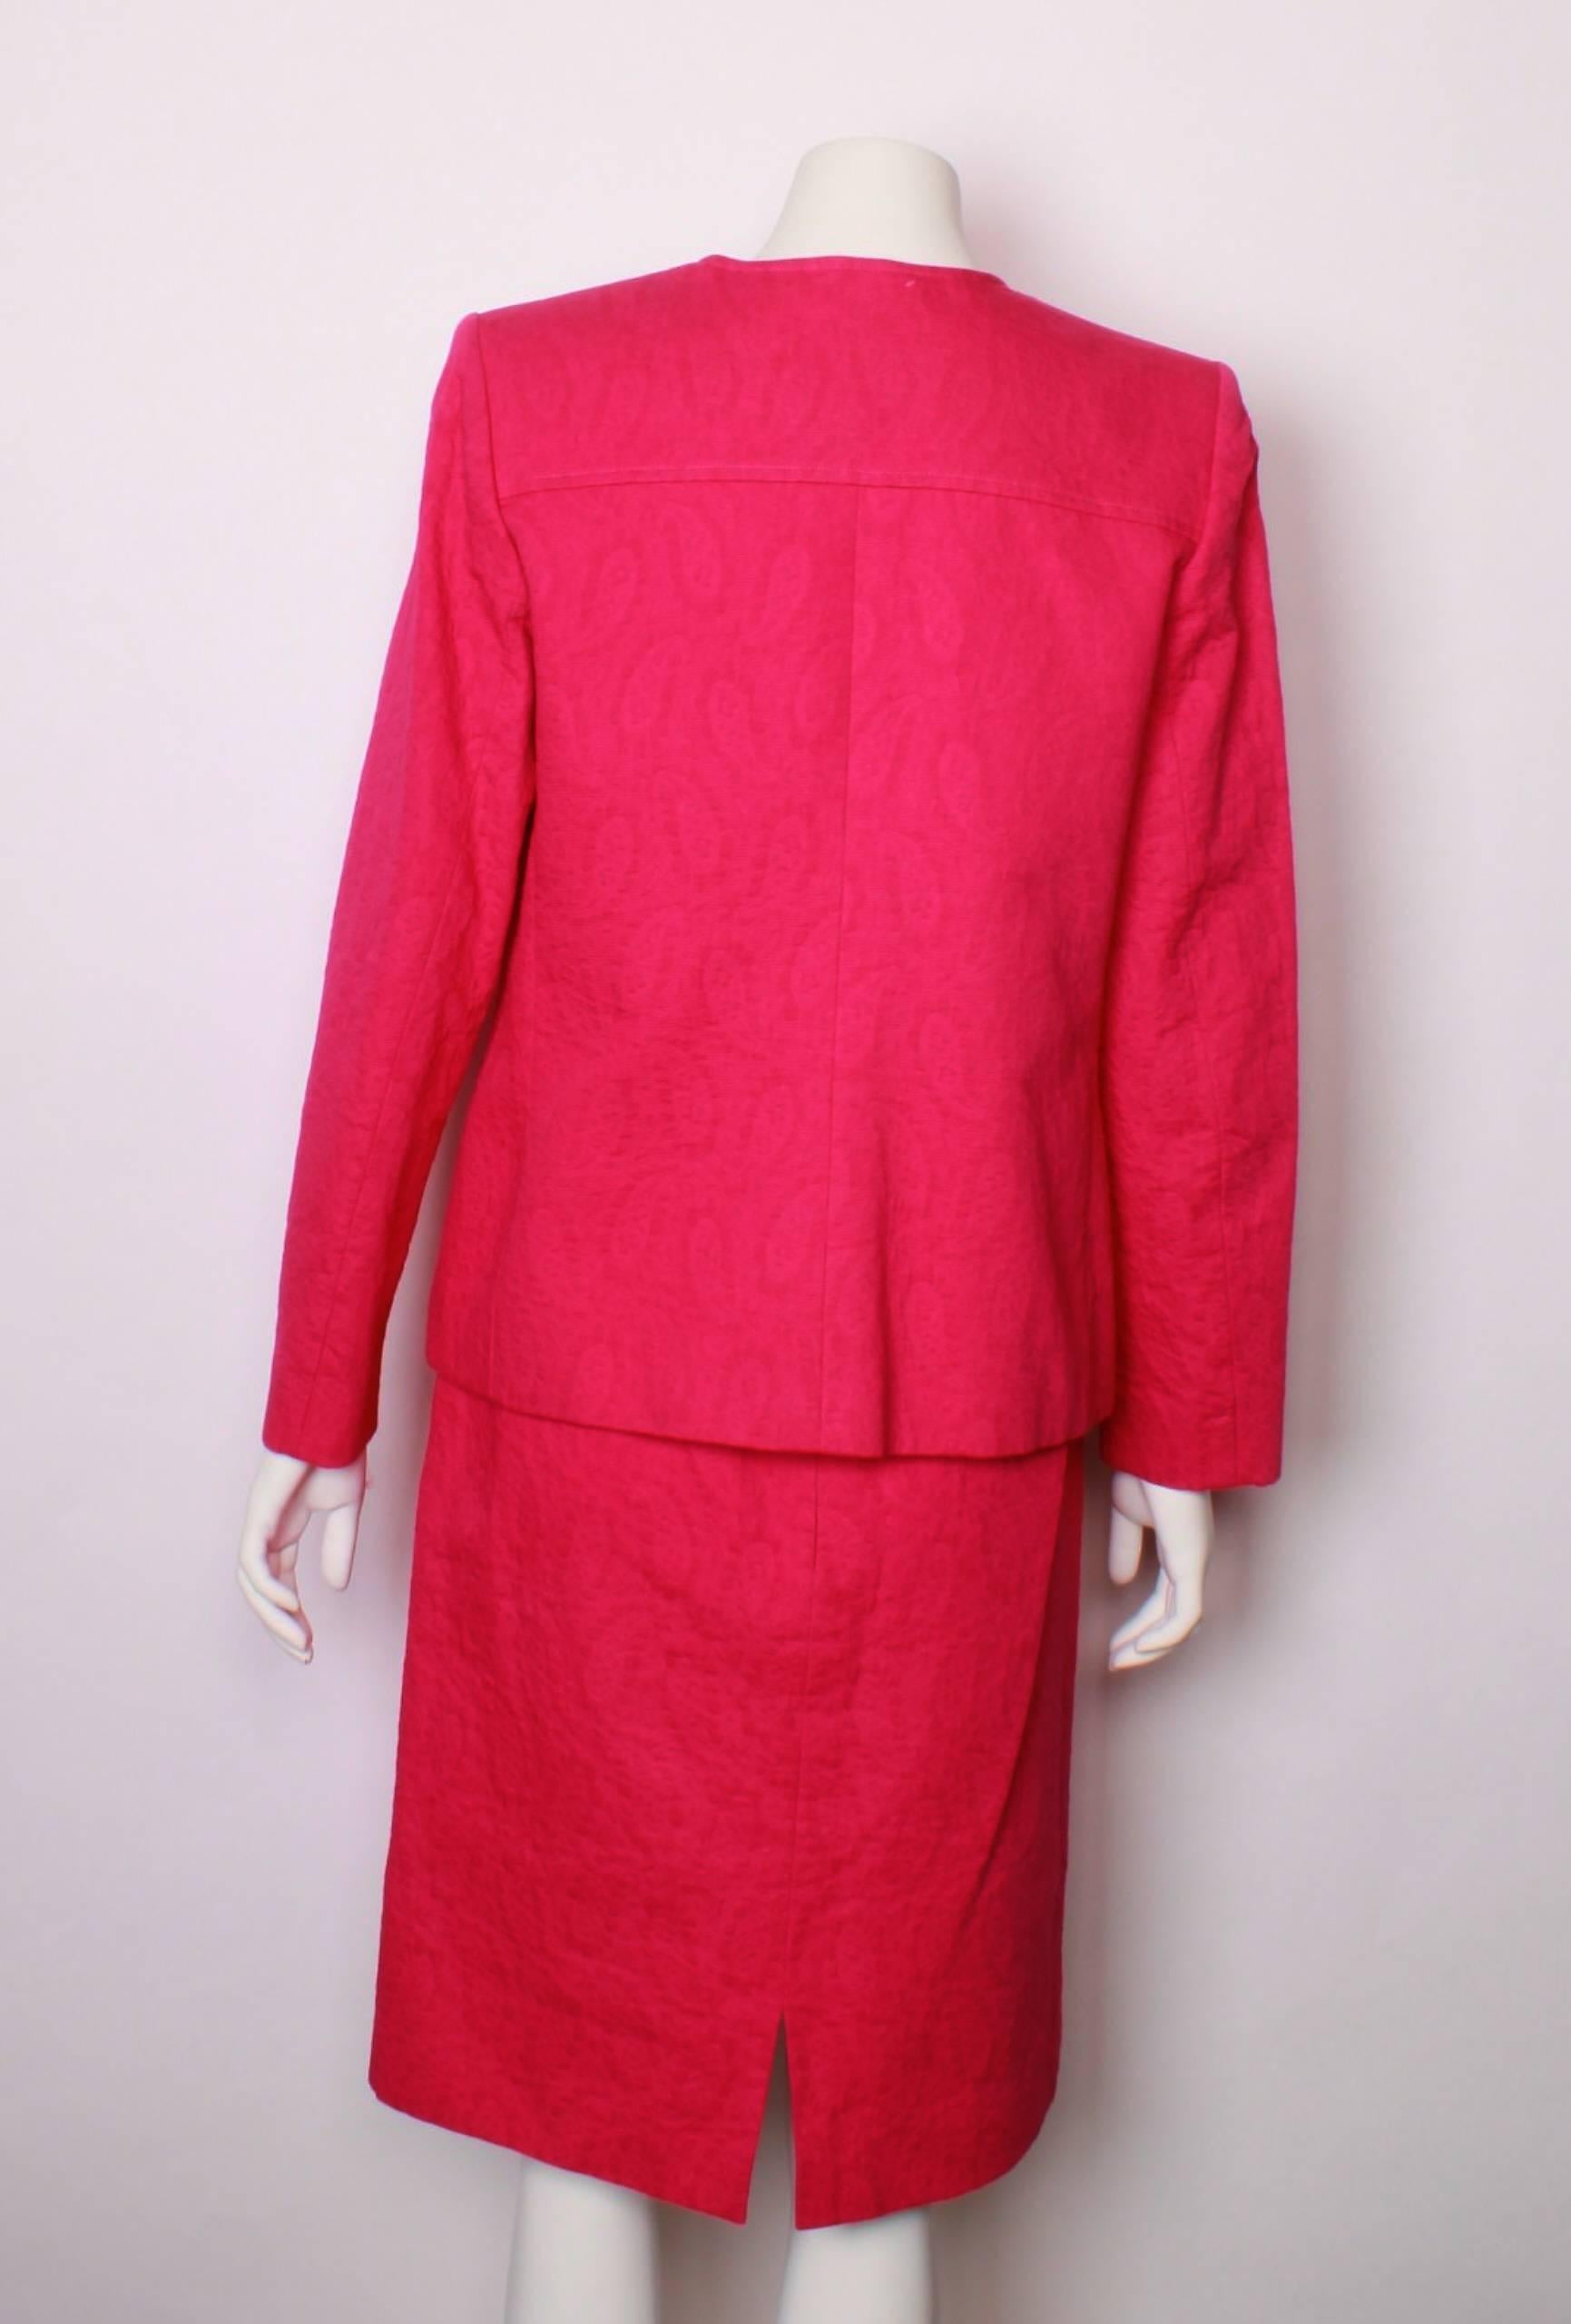 Yves Saint Laurent Variation Orchid Pink Jacquard Suit Ensemble, 1980s  In Good Condition In Melbourne, Victoria